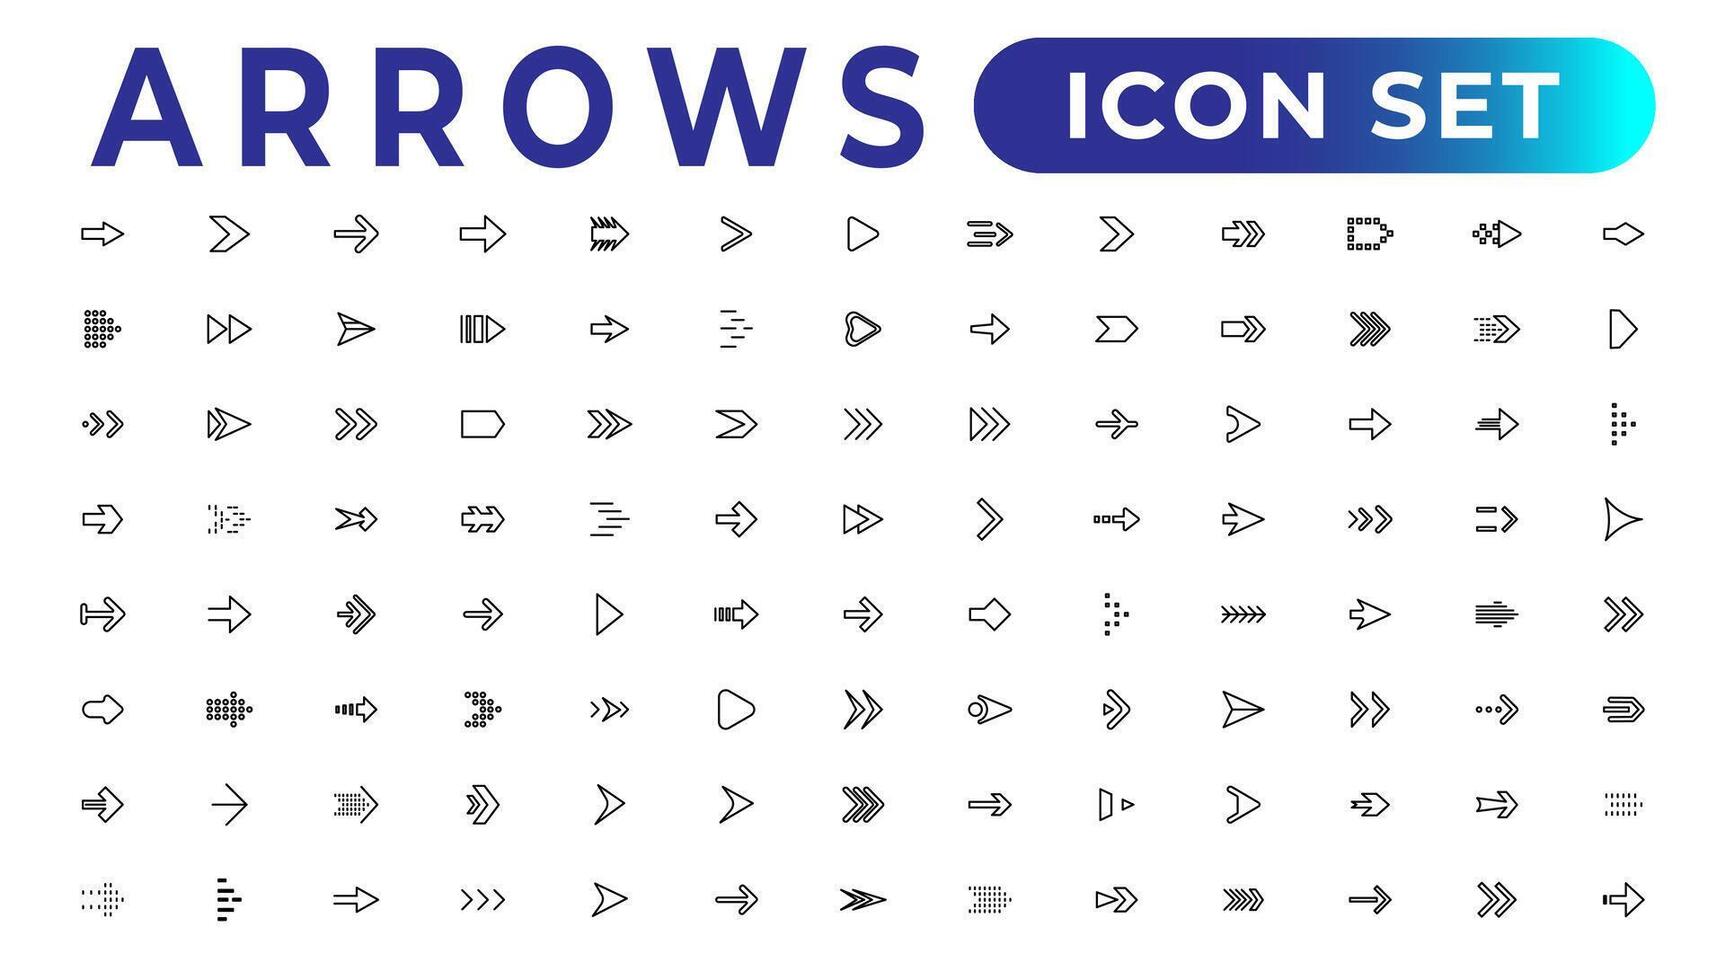 arrow icons set of thin line web icon set, simple outline icons collection, Pixel Perfect icons, Simple vector illustration.